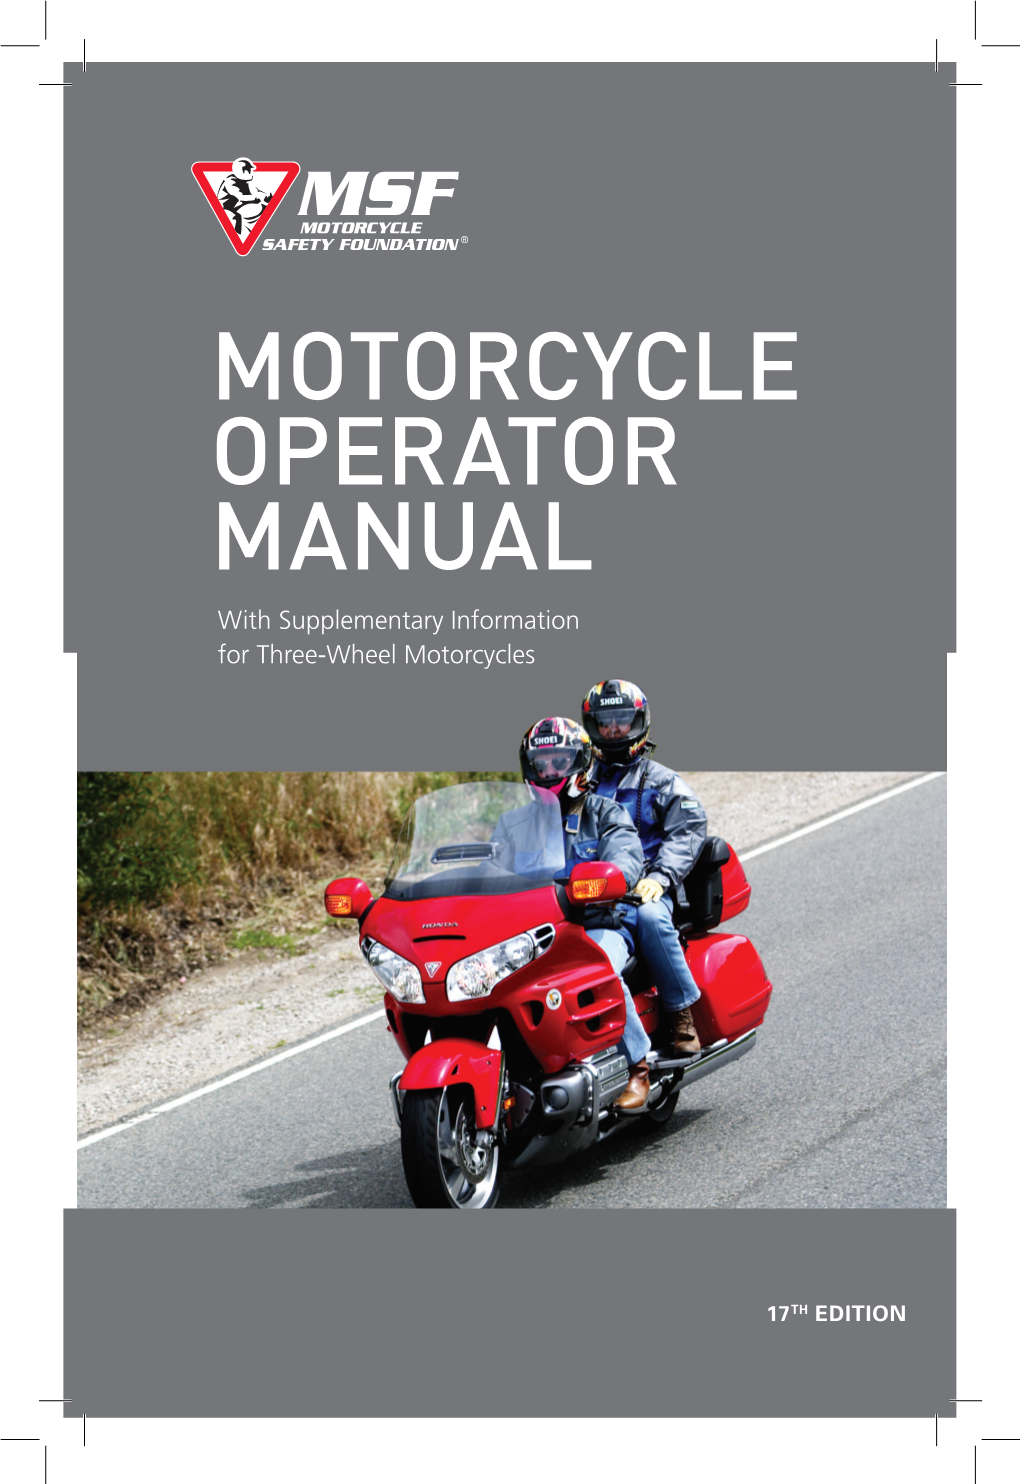 MSF Motorcycle Operator Manual Significant Improvements, and Contains (MOM)